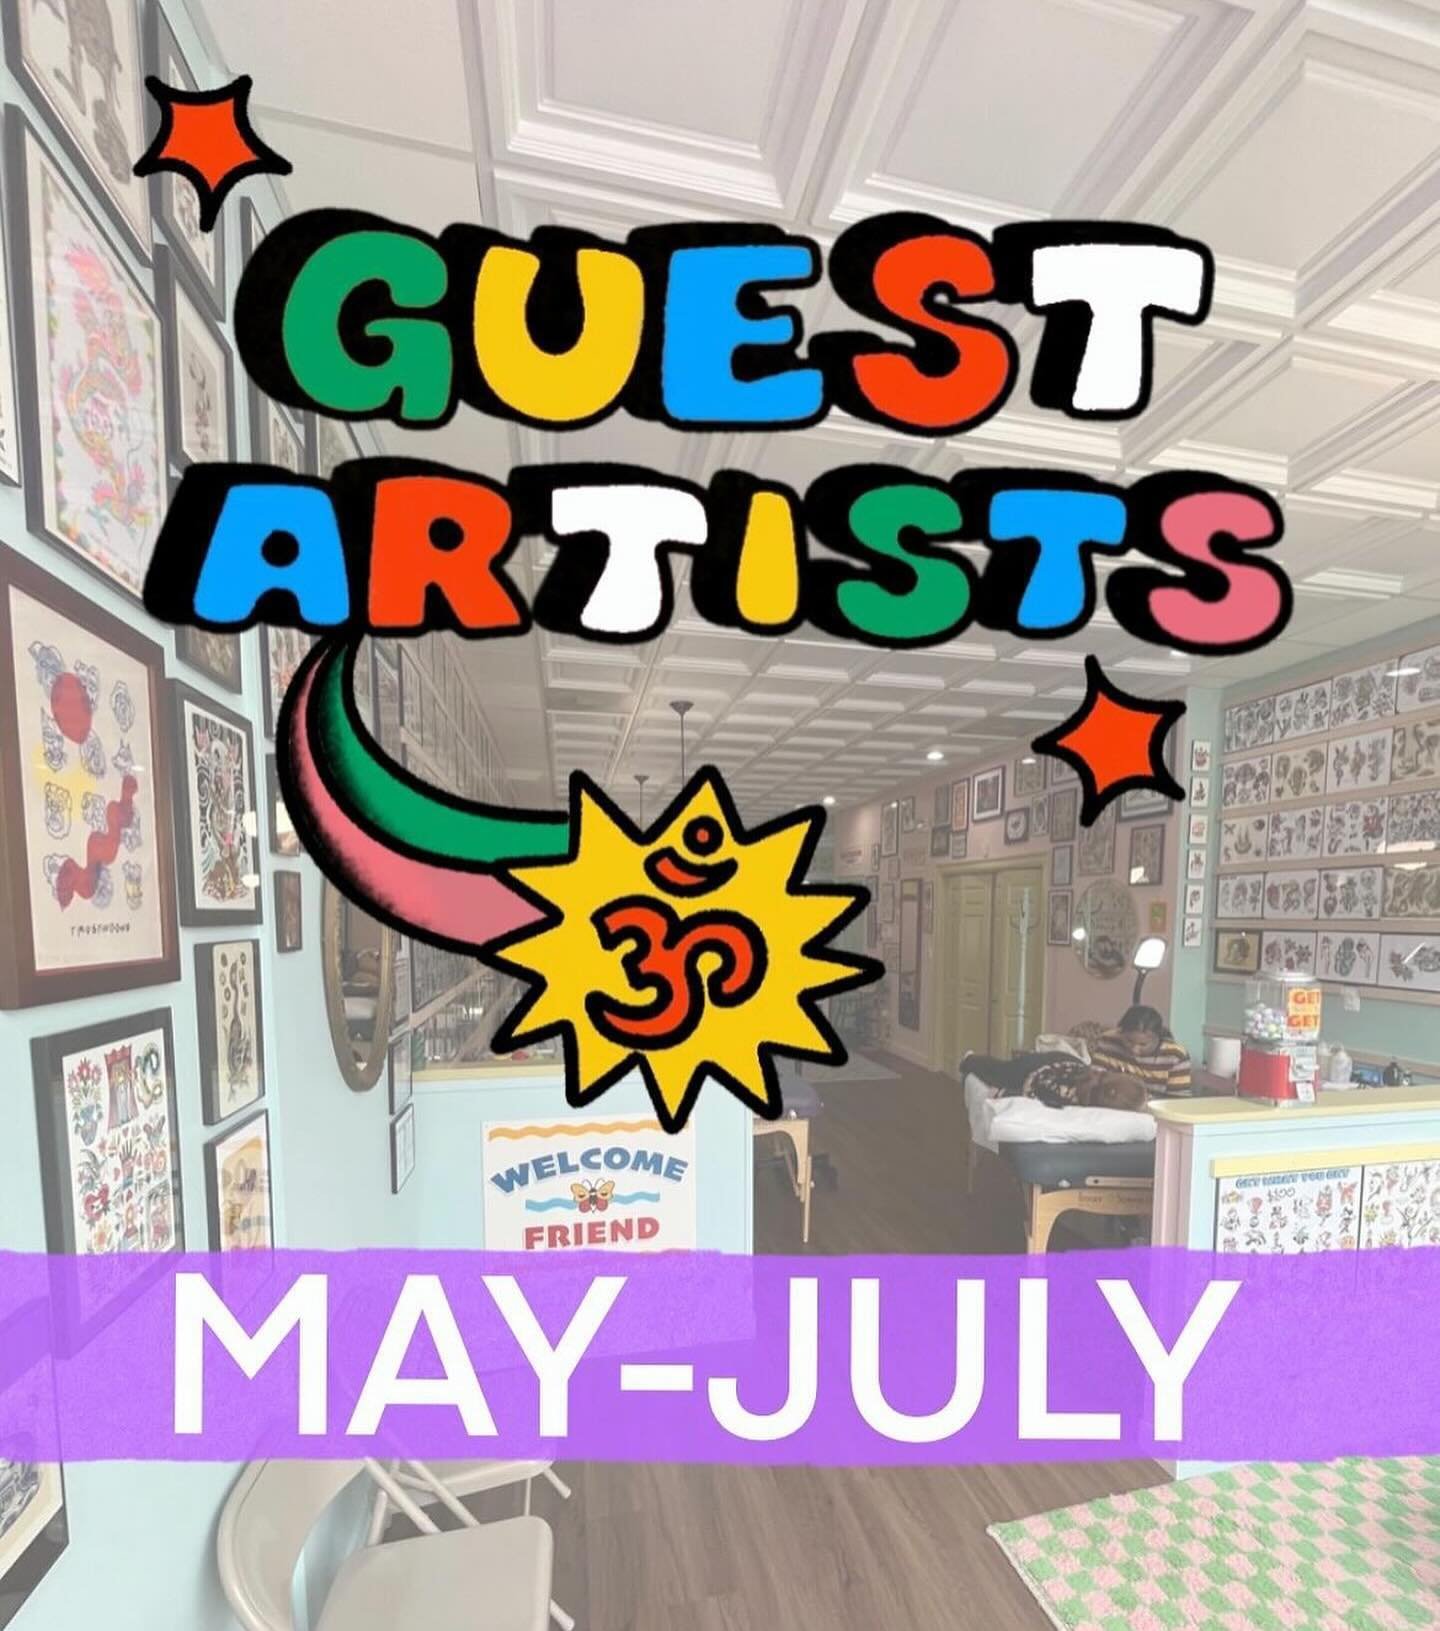 🏖️ A few more guests have been added!!! Please contact guest artists directly for all booking related inquiries.
⬇️⬇️⬇️⬇️⬇️
@courtneykotattoo 5/17-5/19 *FULLY BOOKED*
@setttar3 5/21-5/25 *DM TO BOOK
@dtylertattooer 5/27-5/31 *DM TO BOOK
@okaytats 5/